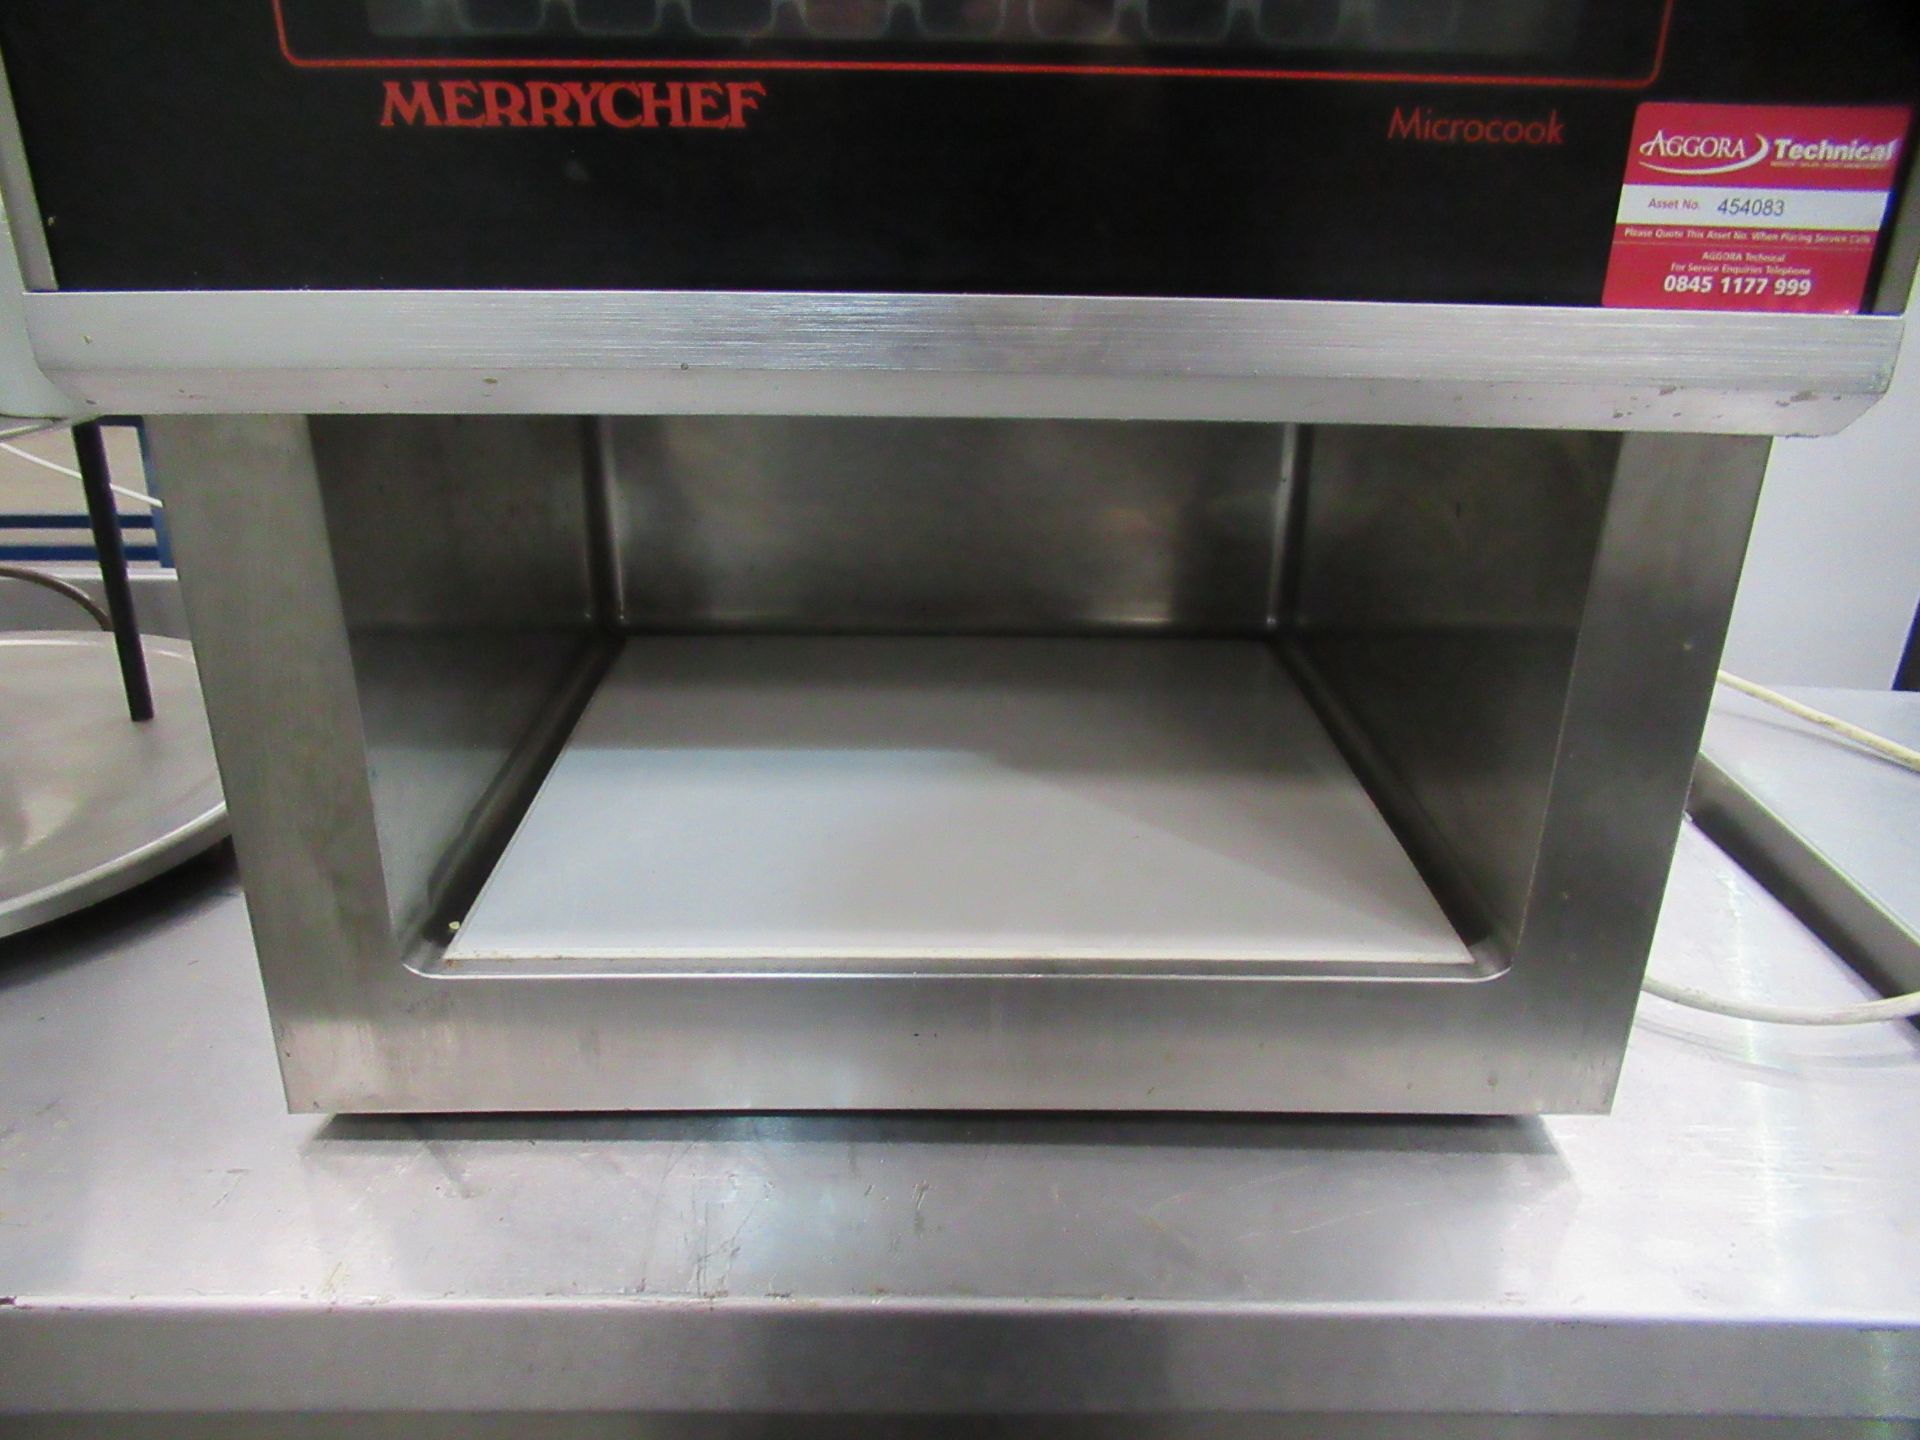 MerryChef 115M Commercial Microwave - Image 3 of 3